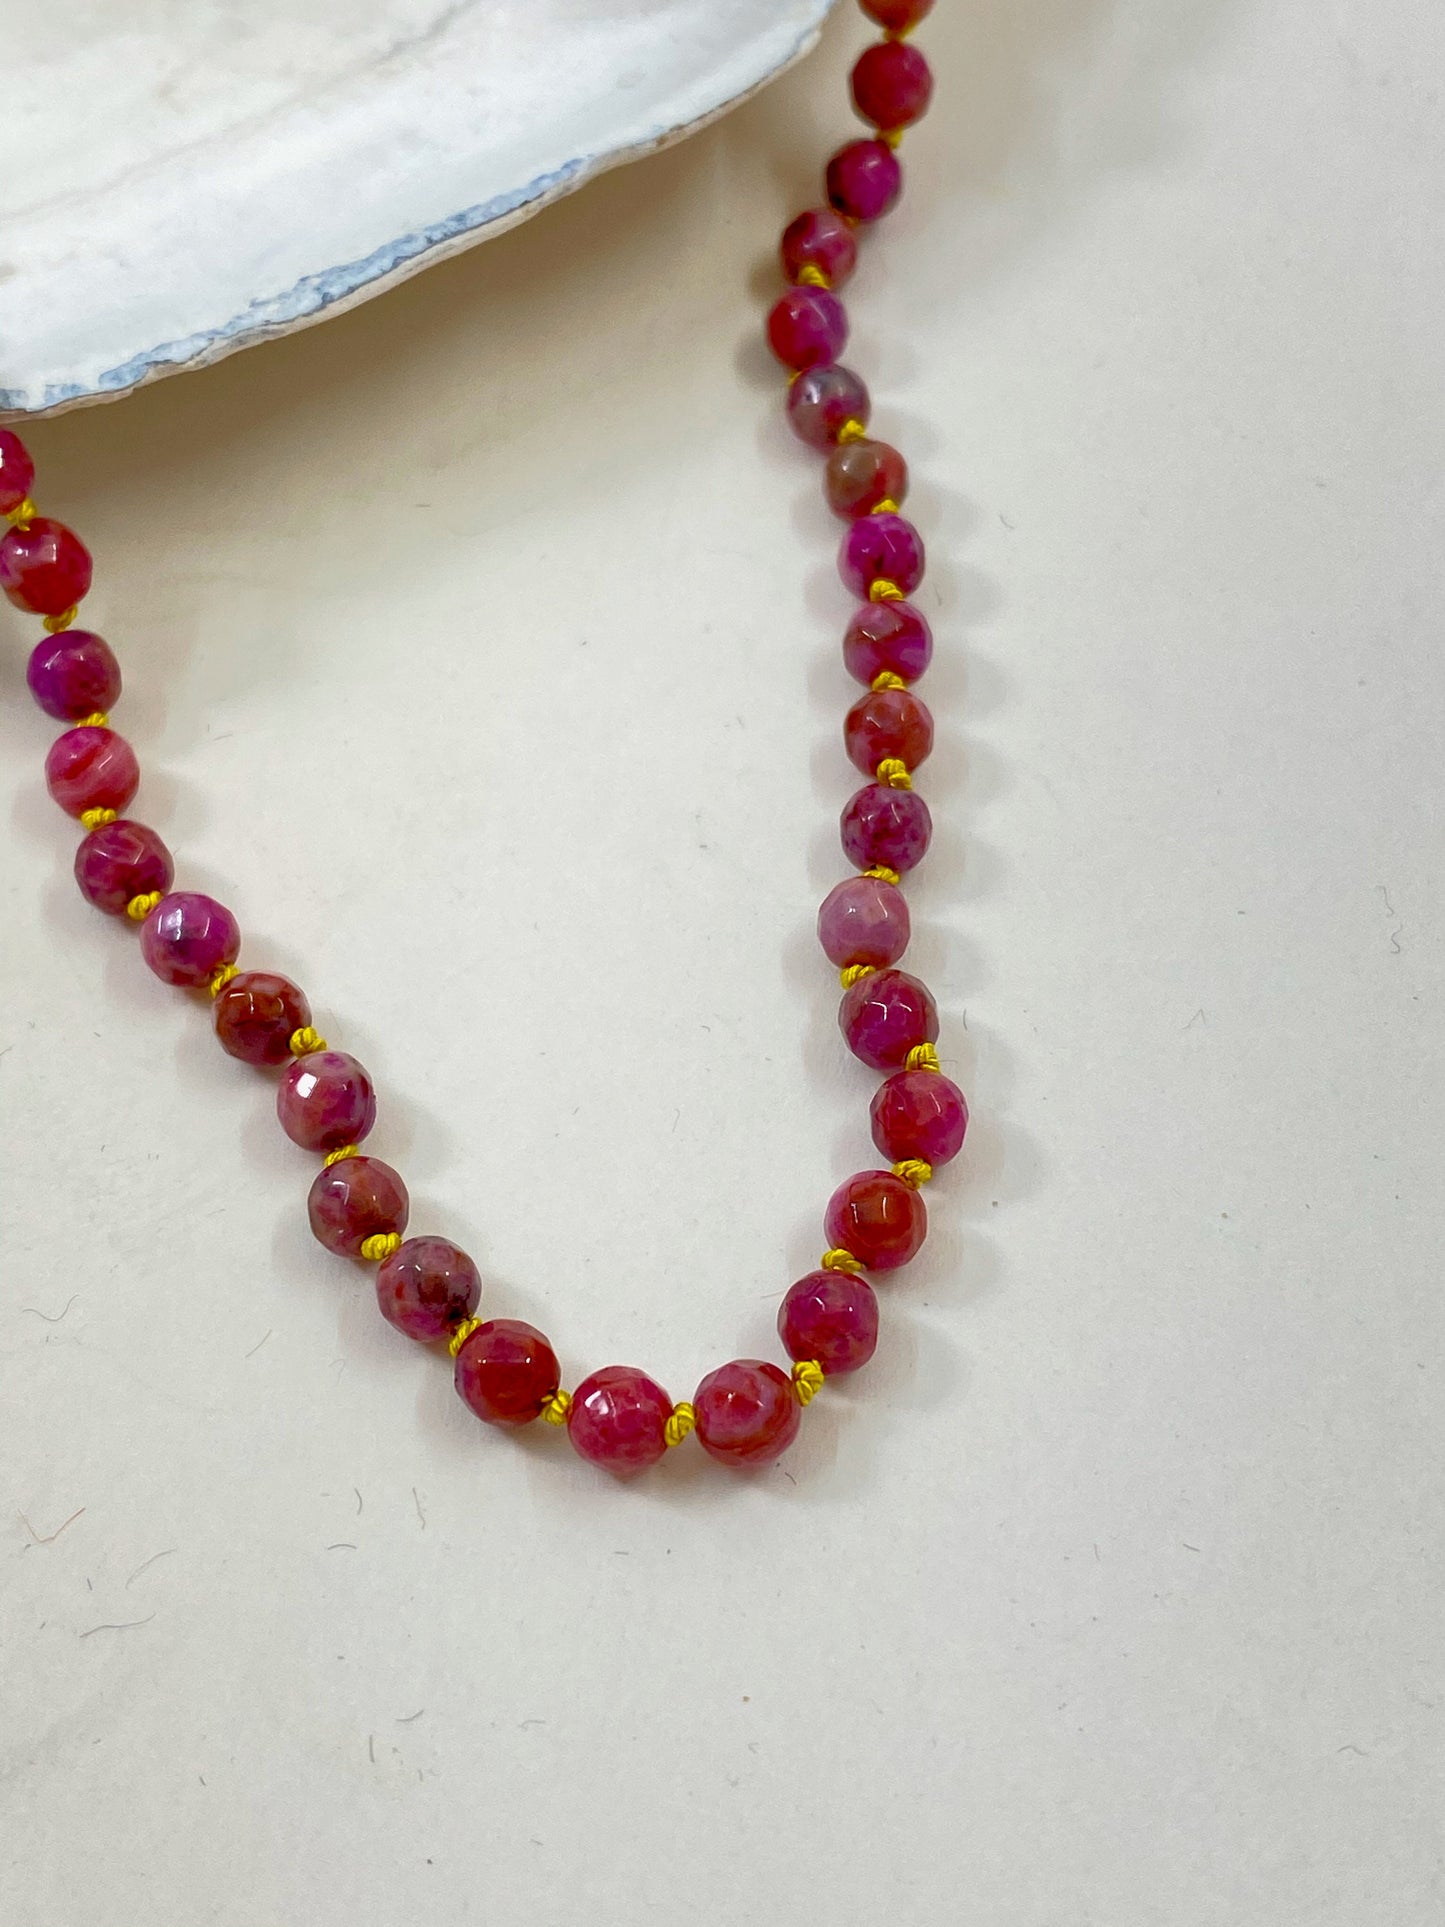 Children's precious rose agate beaded necklace. Knotted safely with silk thread, to be worn in sweetness and joy.